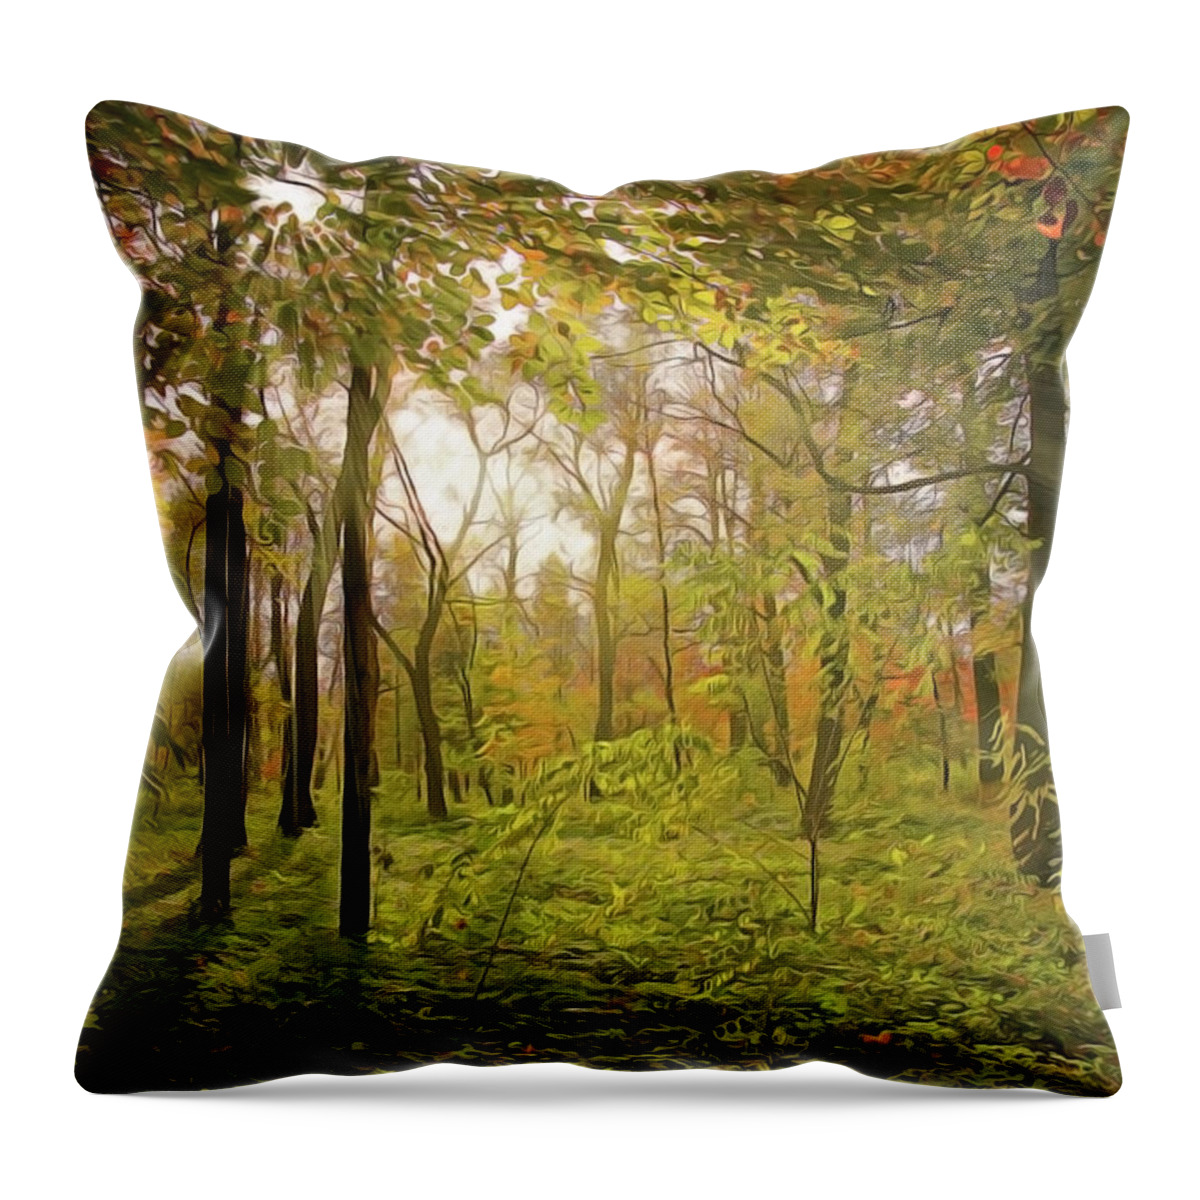 The Woods Throw Pillow featuring the painting The Woods by Harry Warrick